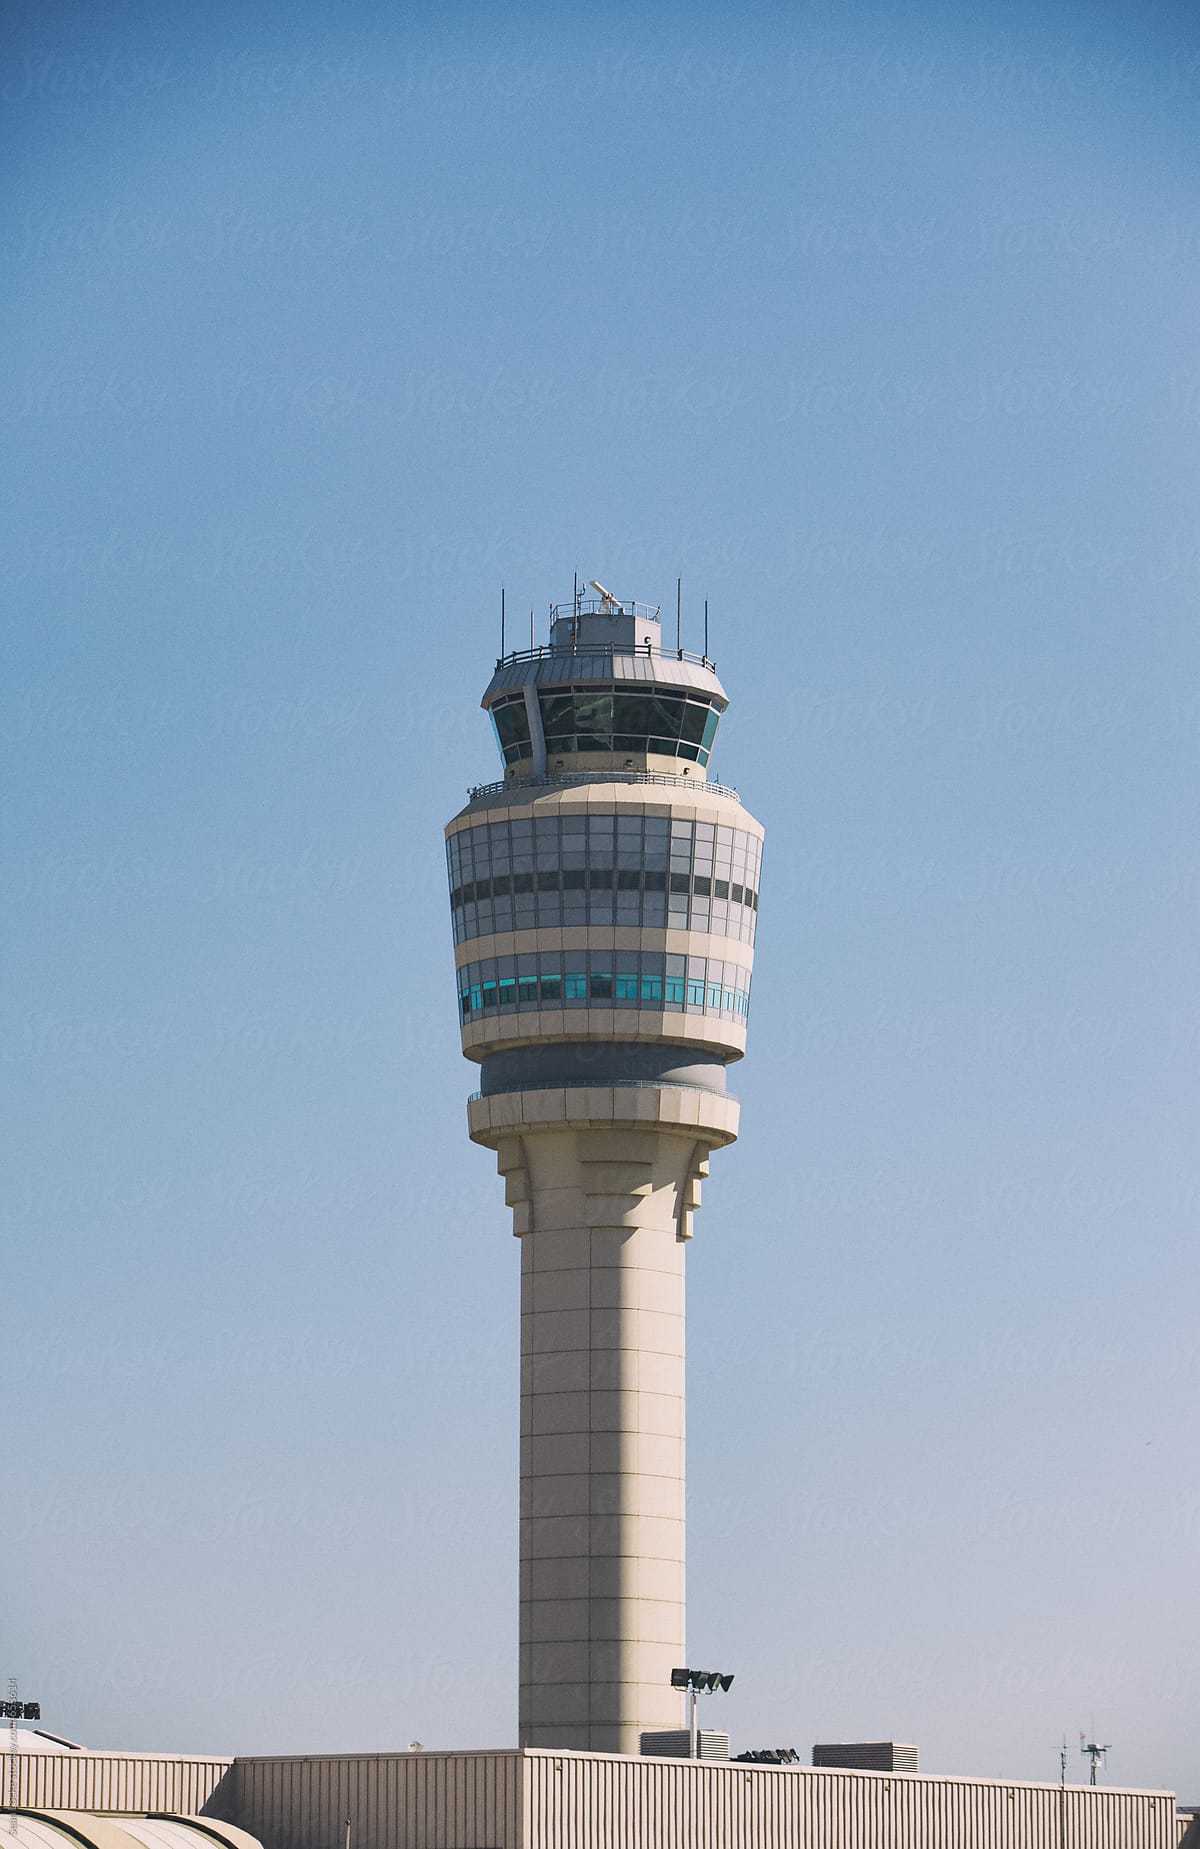 St. Louis Airport Control Tower